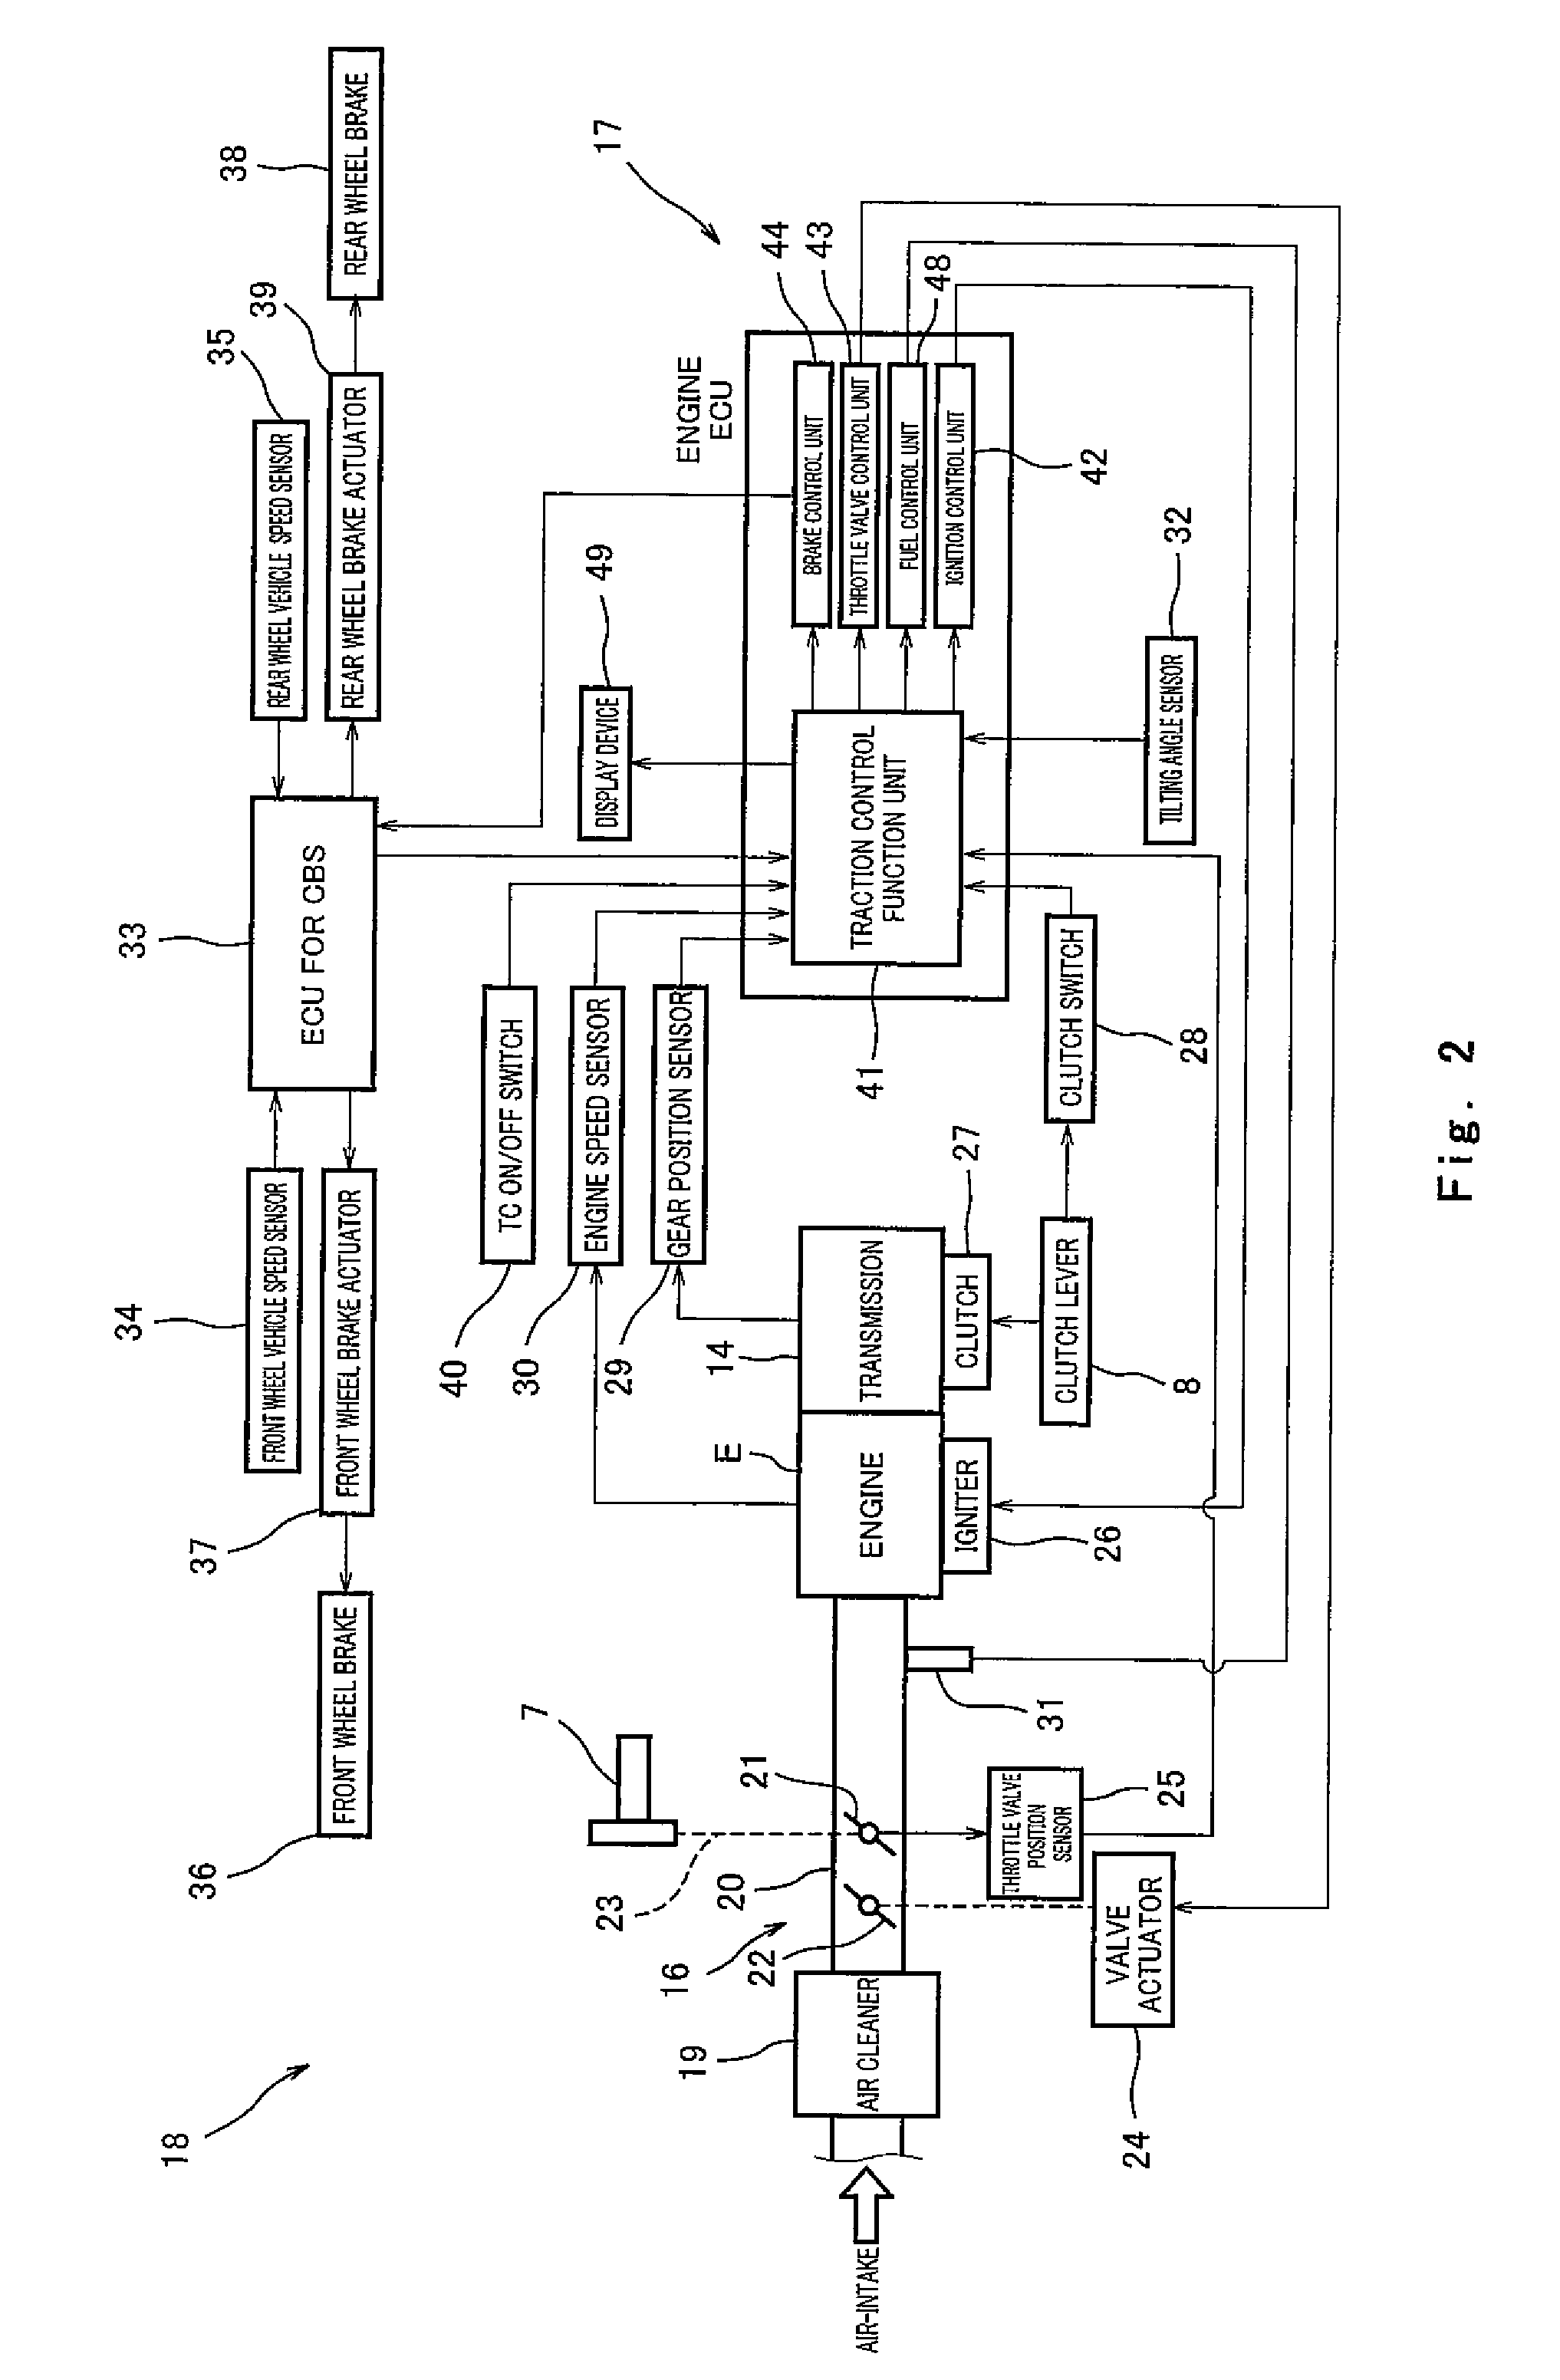 Slip Suppression Control System for Vehicle